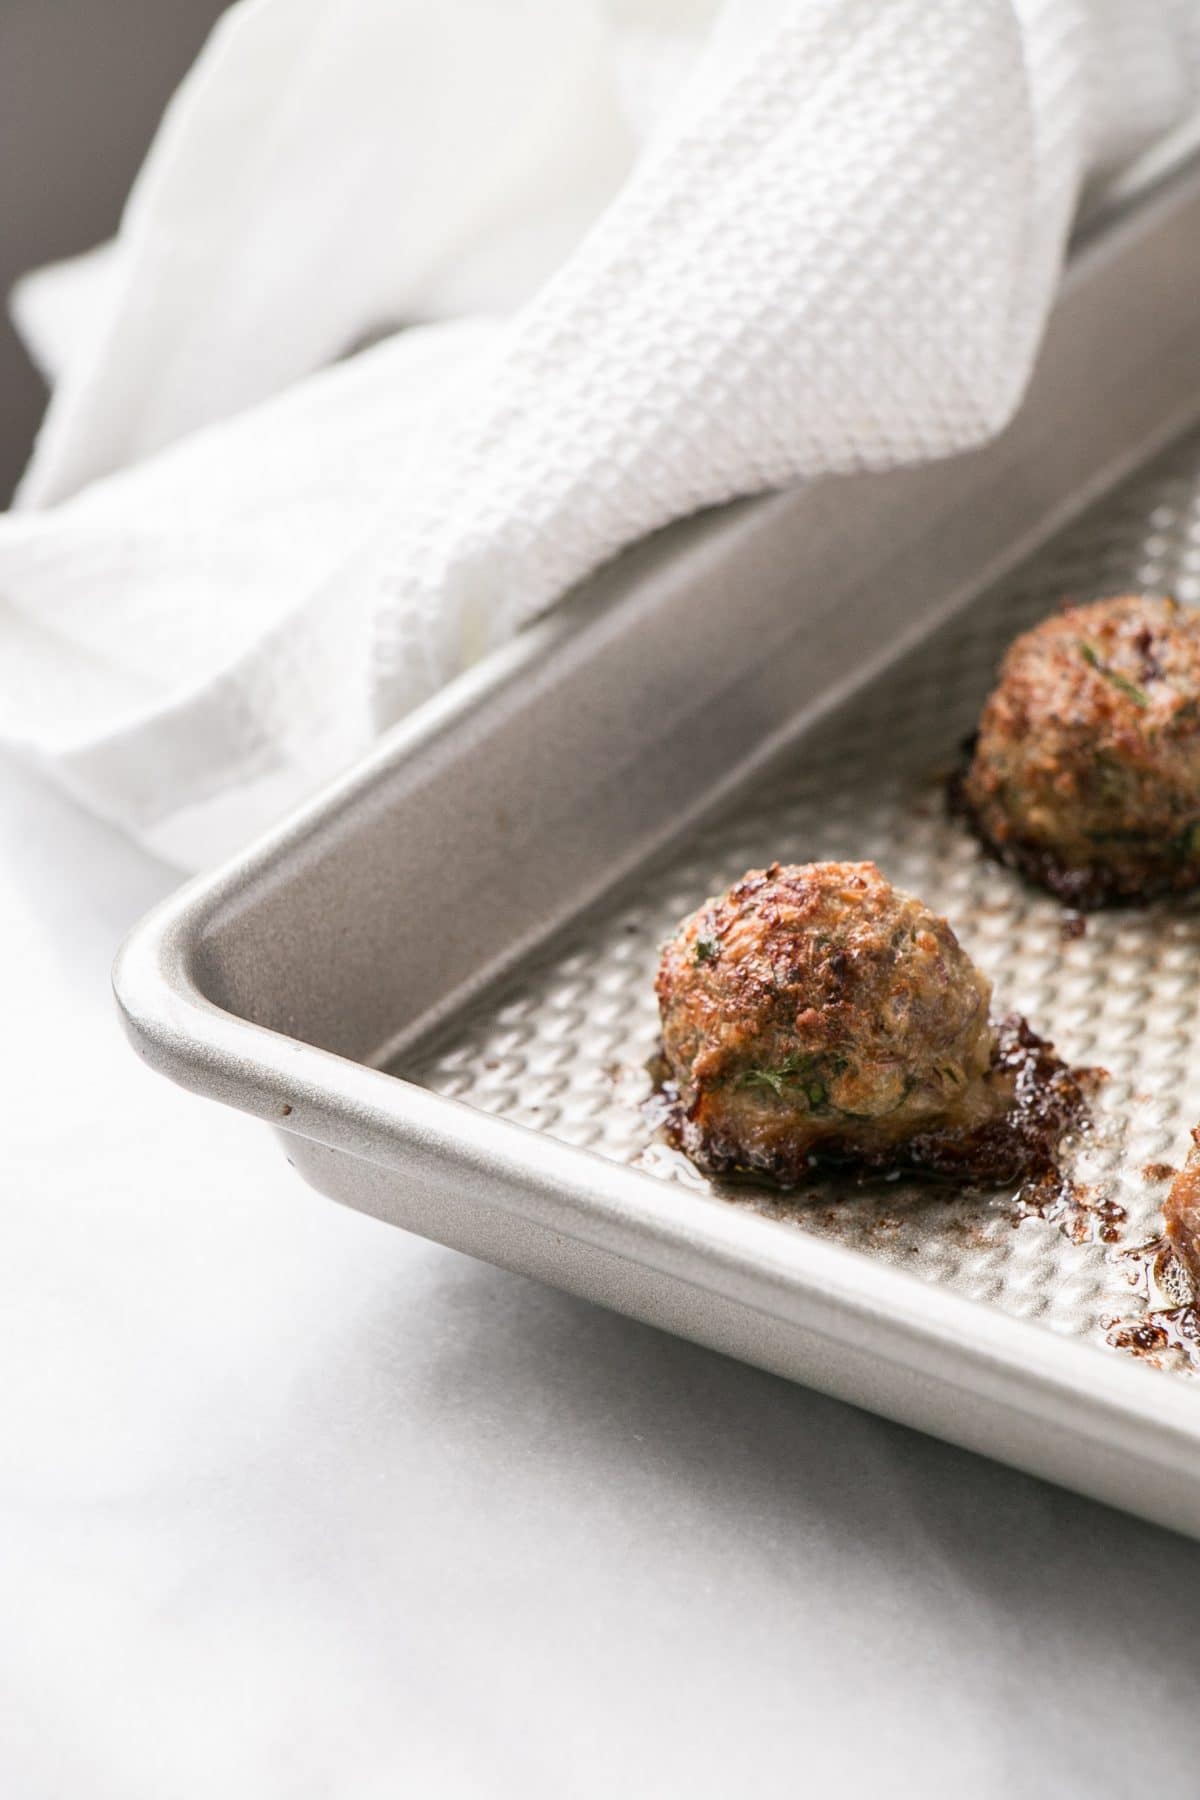 Mini Lamb Meatballs are a quick and easy way to bake juicy and tasty meatballs for dinner! Serve with yogurt and cucumber salad for a refreshing supper! #meatballs #lambs #dinner #weekdaydinner